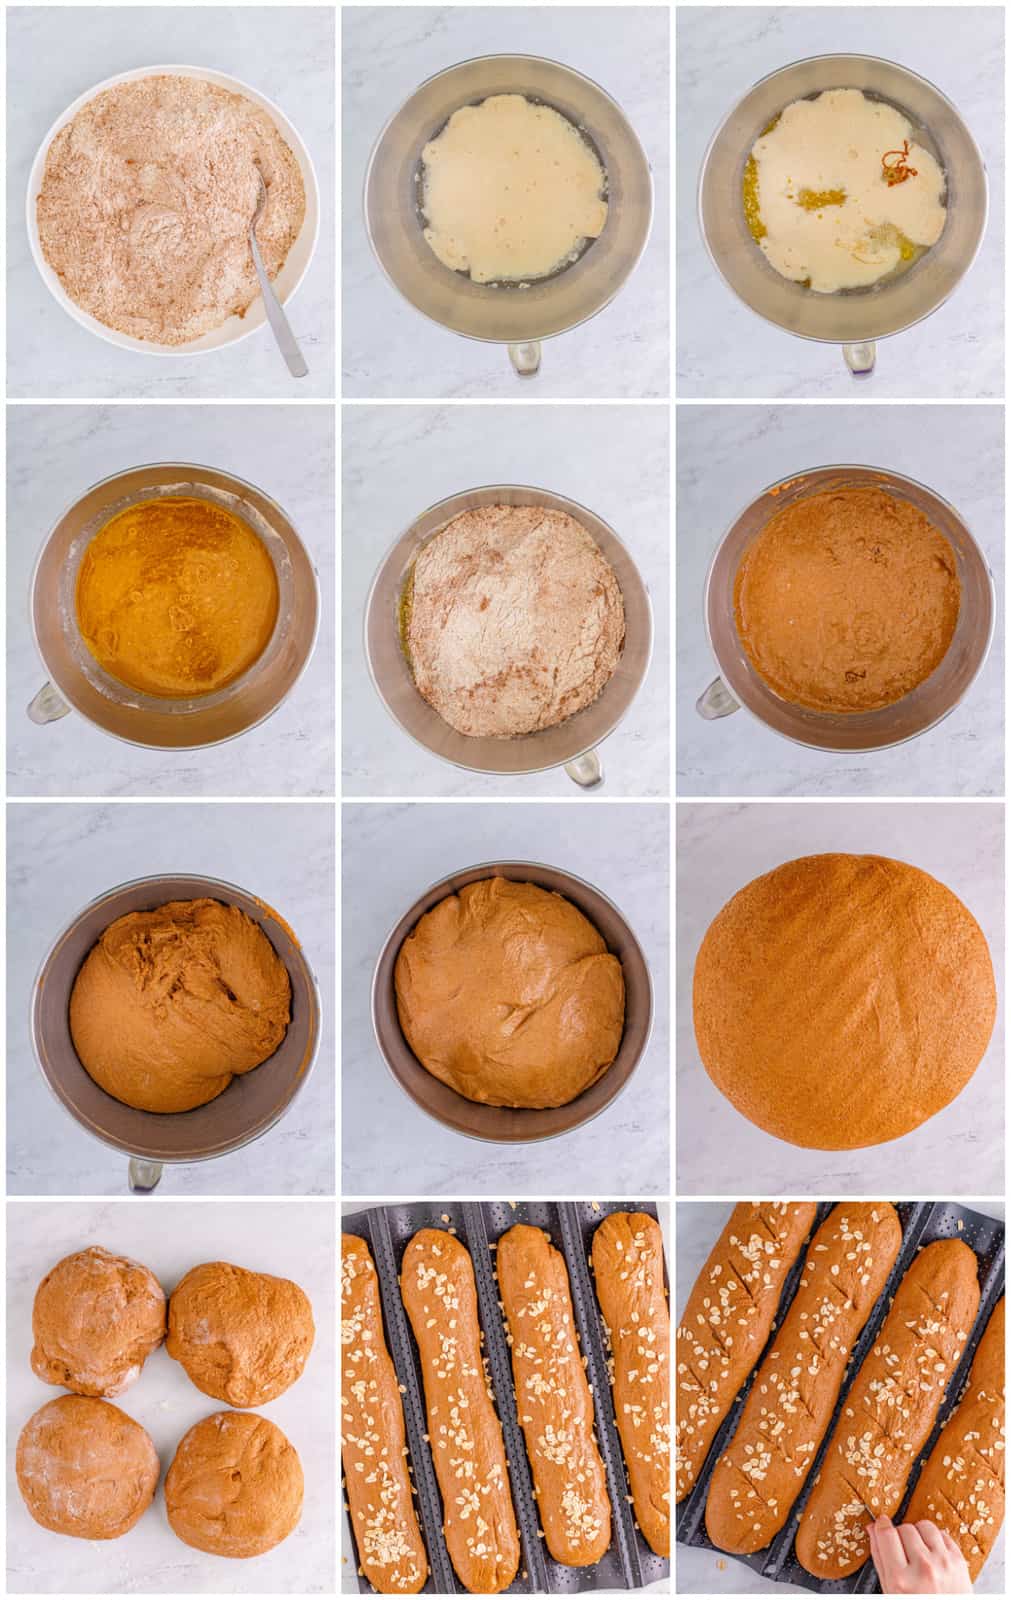 Step by step photos on how to make a Brown Bread Recipe.